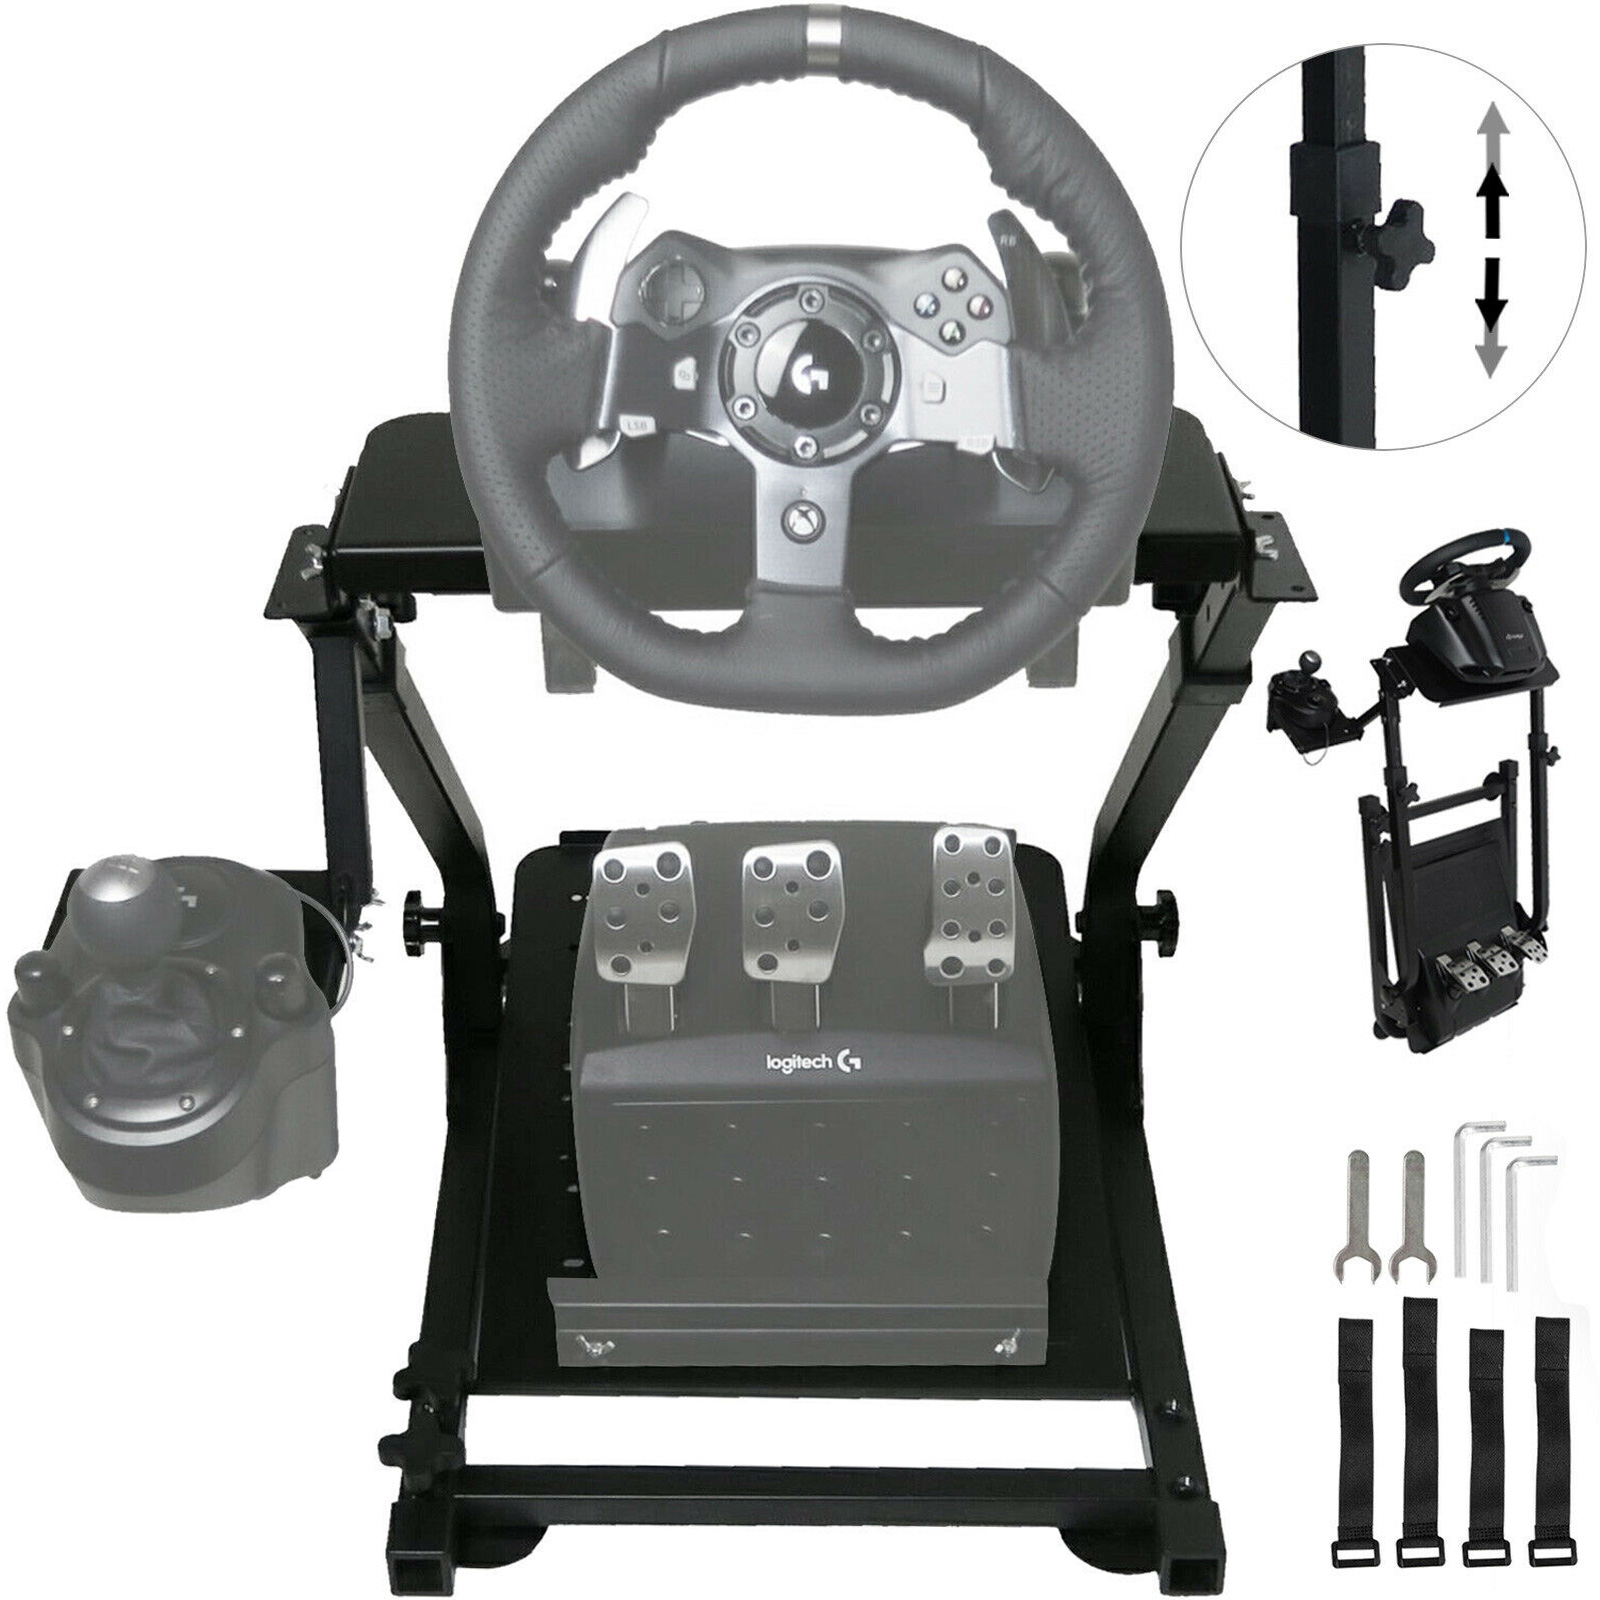 racing wheel stand,stainless steel,wide compatibility